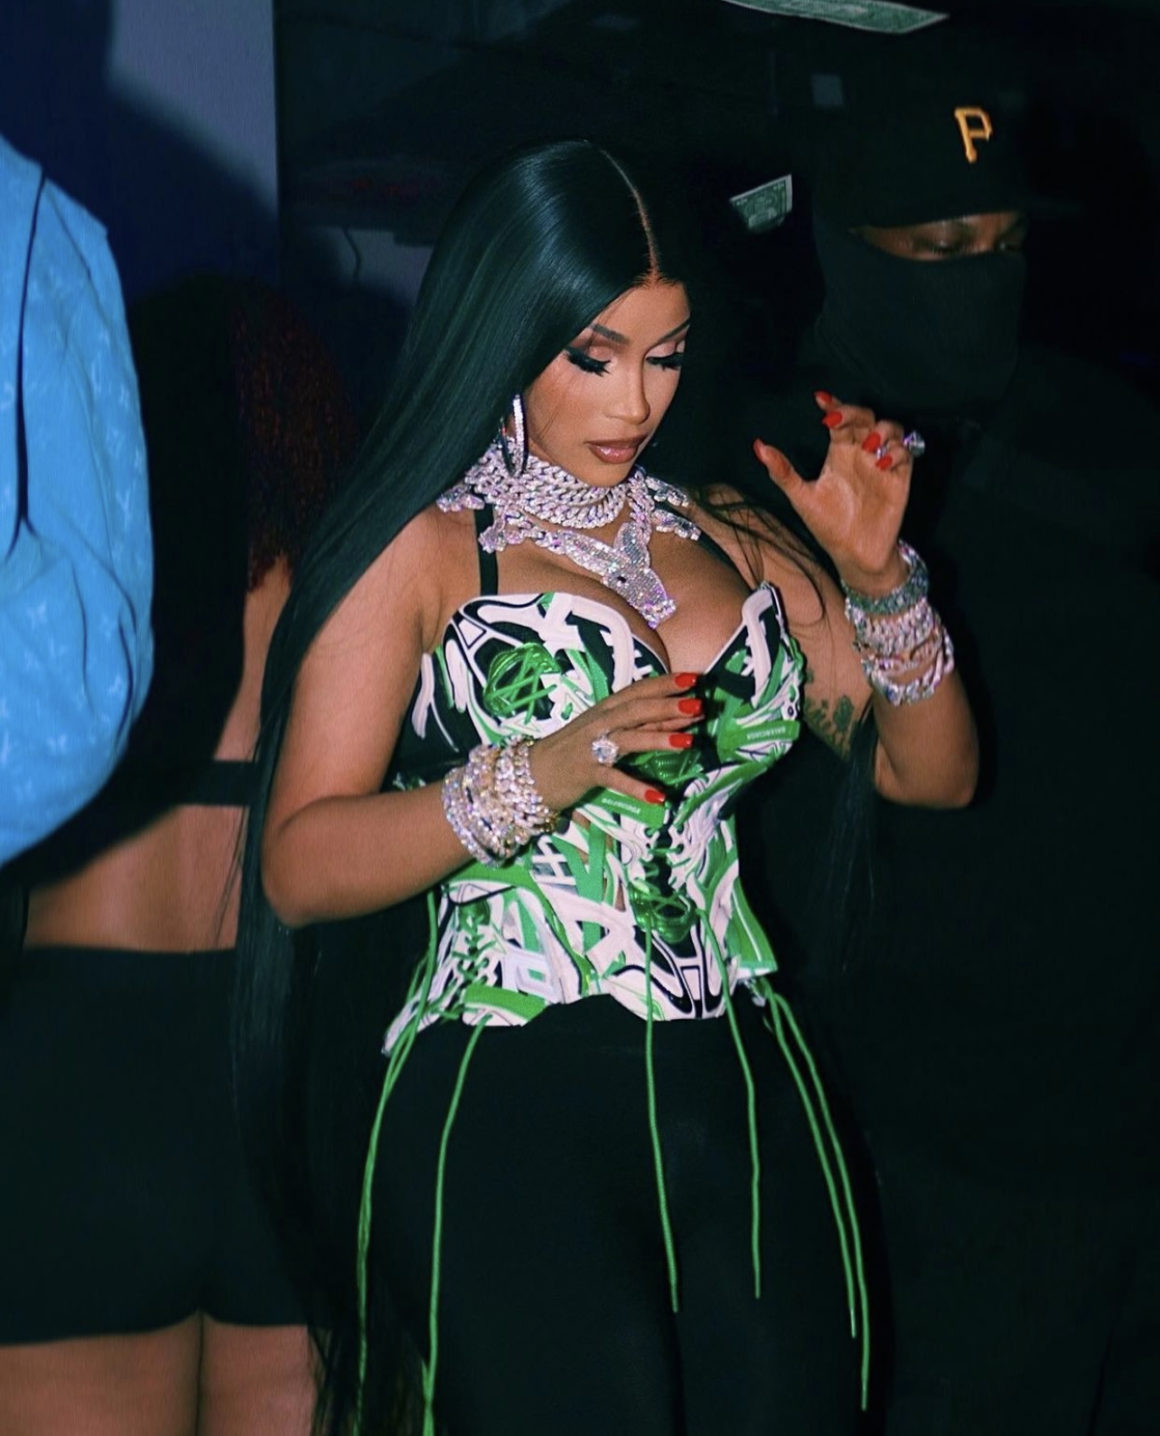 Cardi B Attends Offset's 'Sneaker Ball' Birthday Party in LA